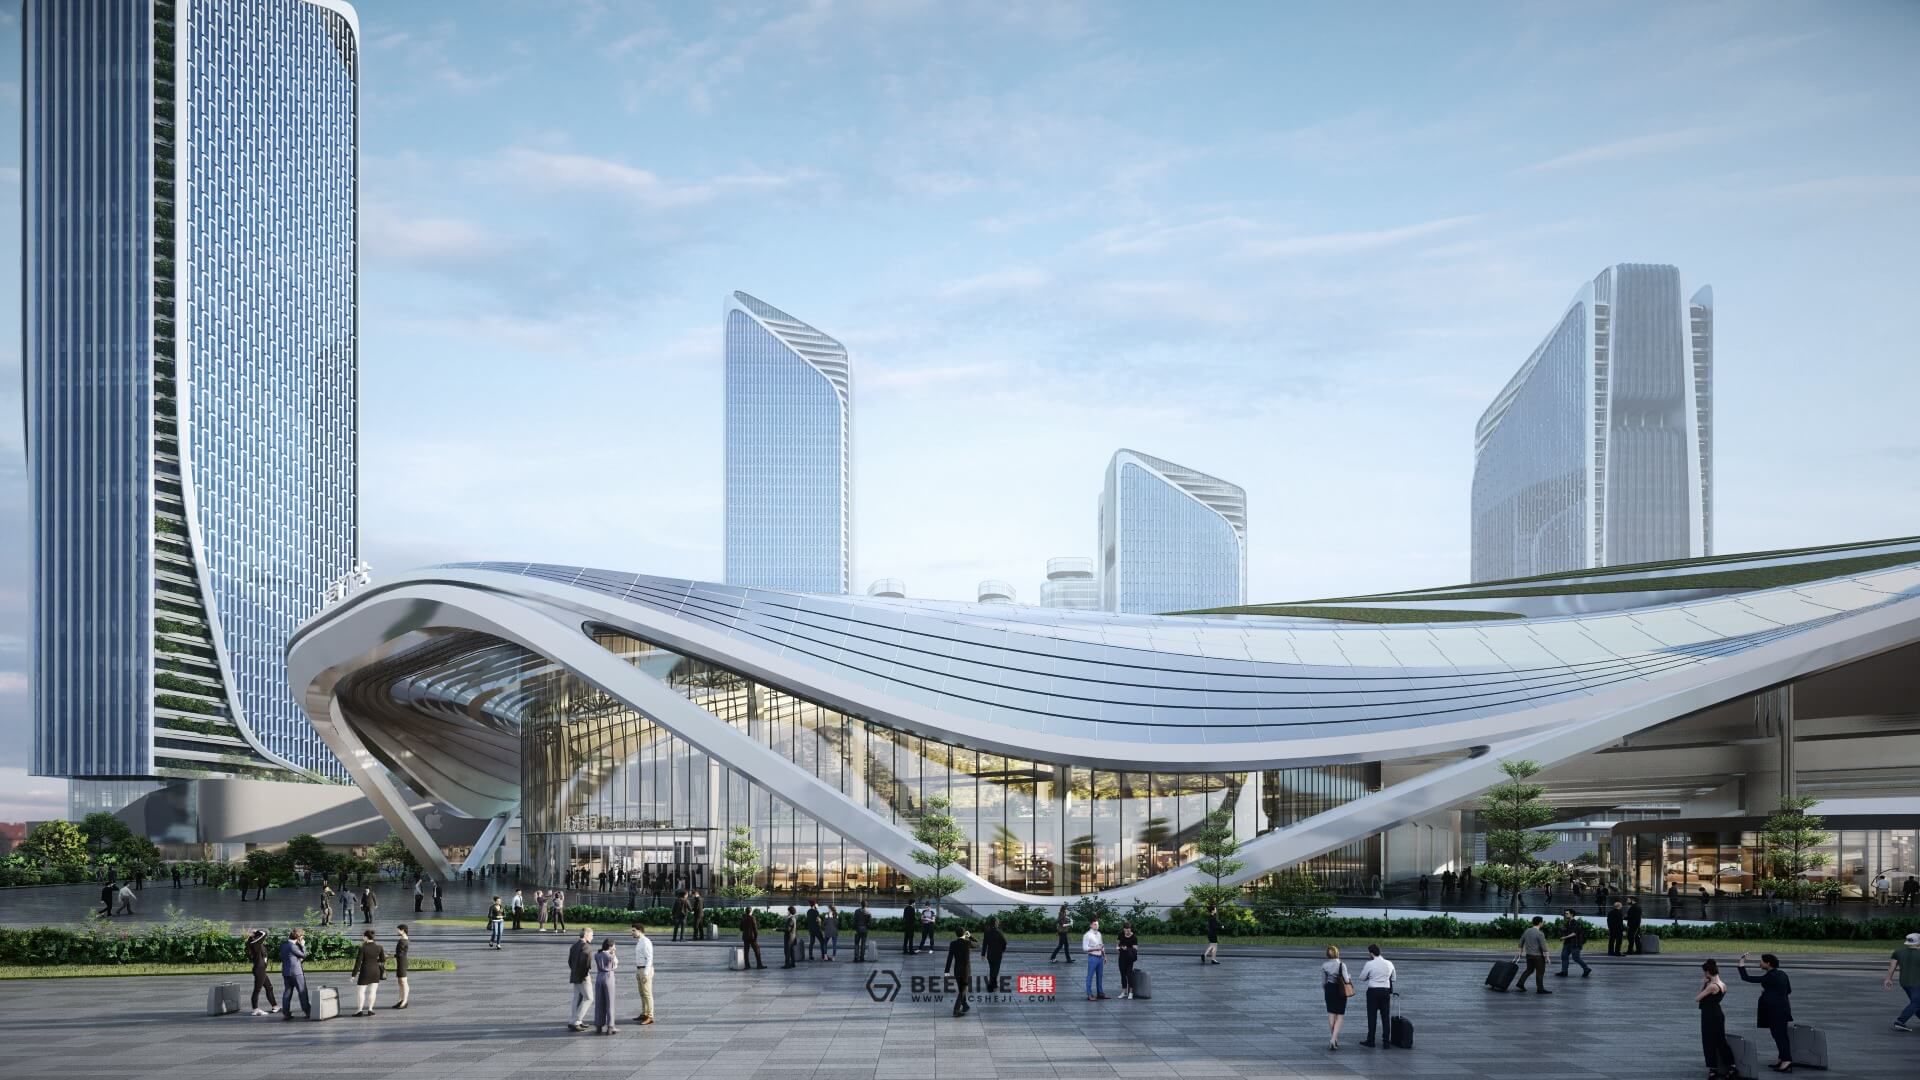 Humen High Speed Rail Station Expansion Project Master Plan, rendered in Lumion by Beehive. 